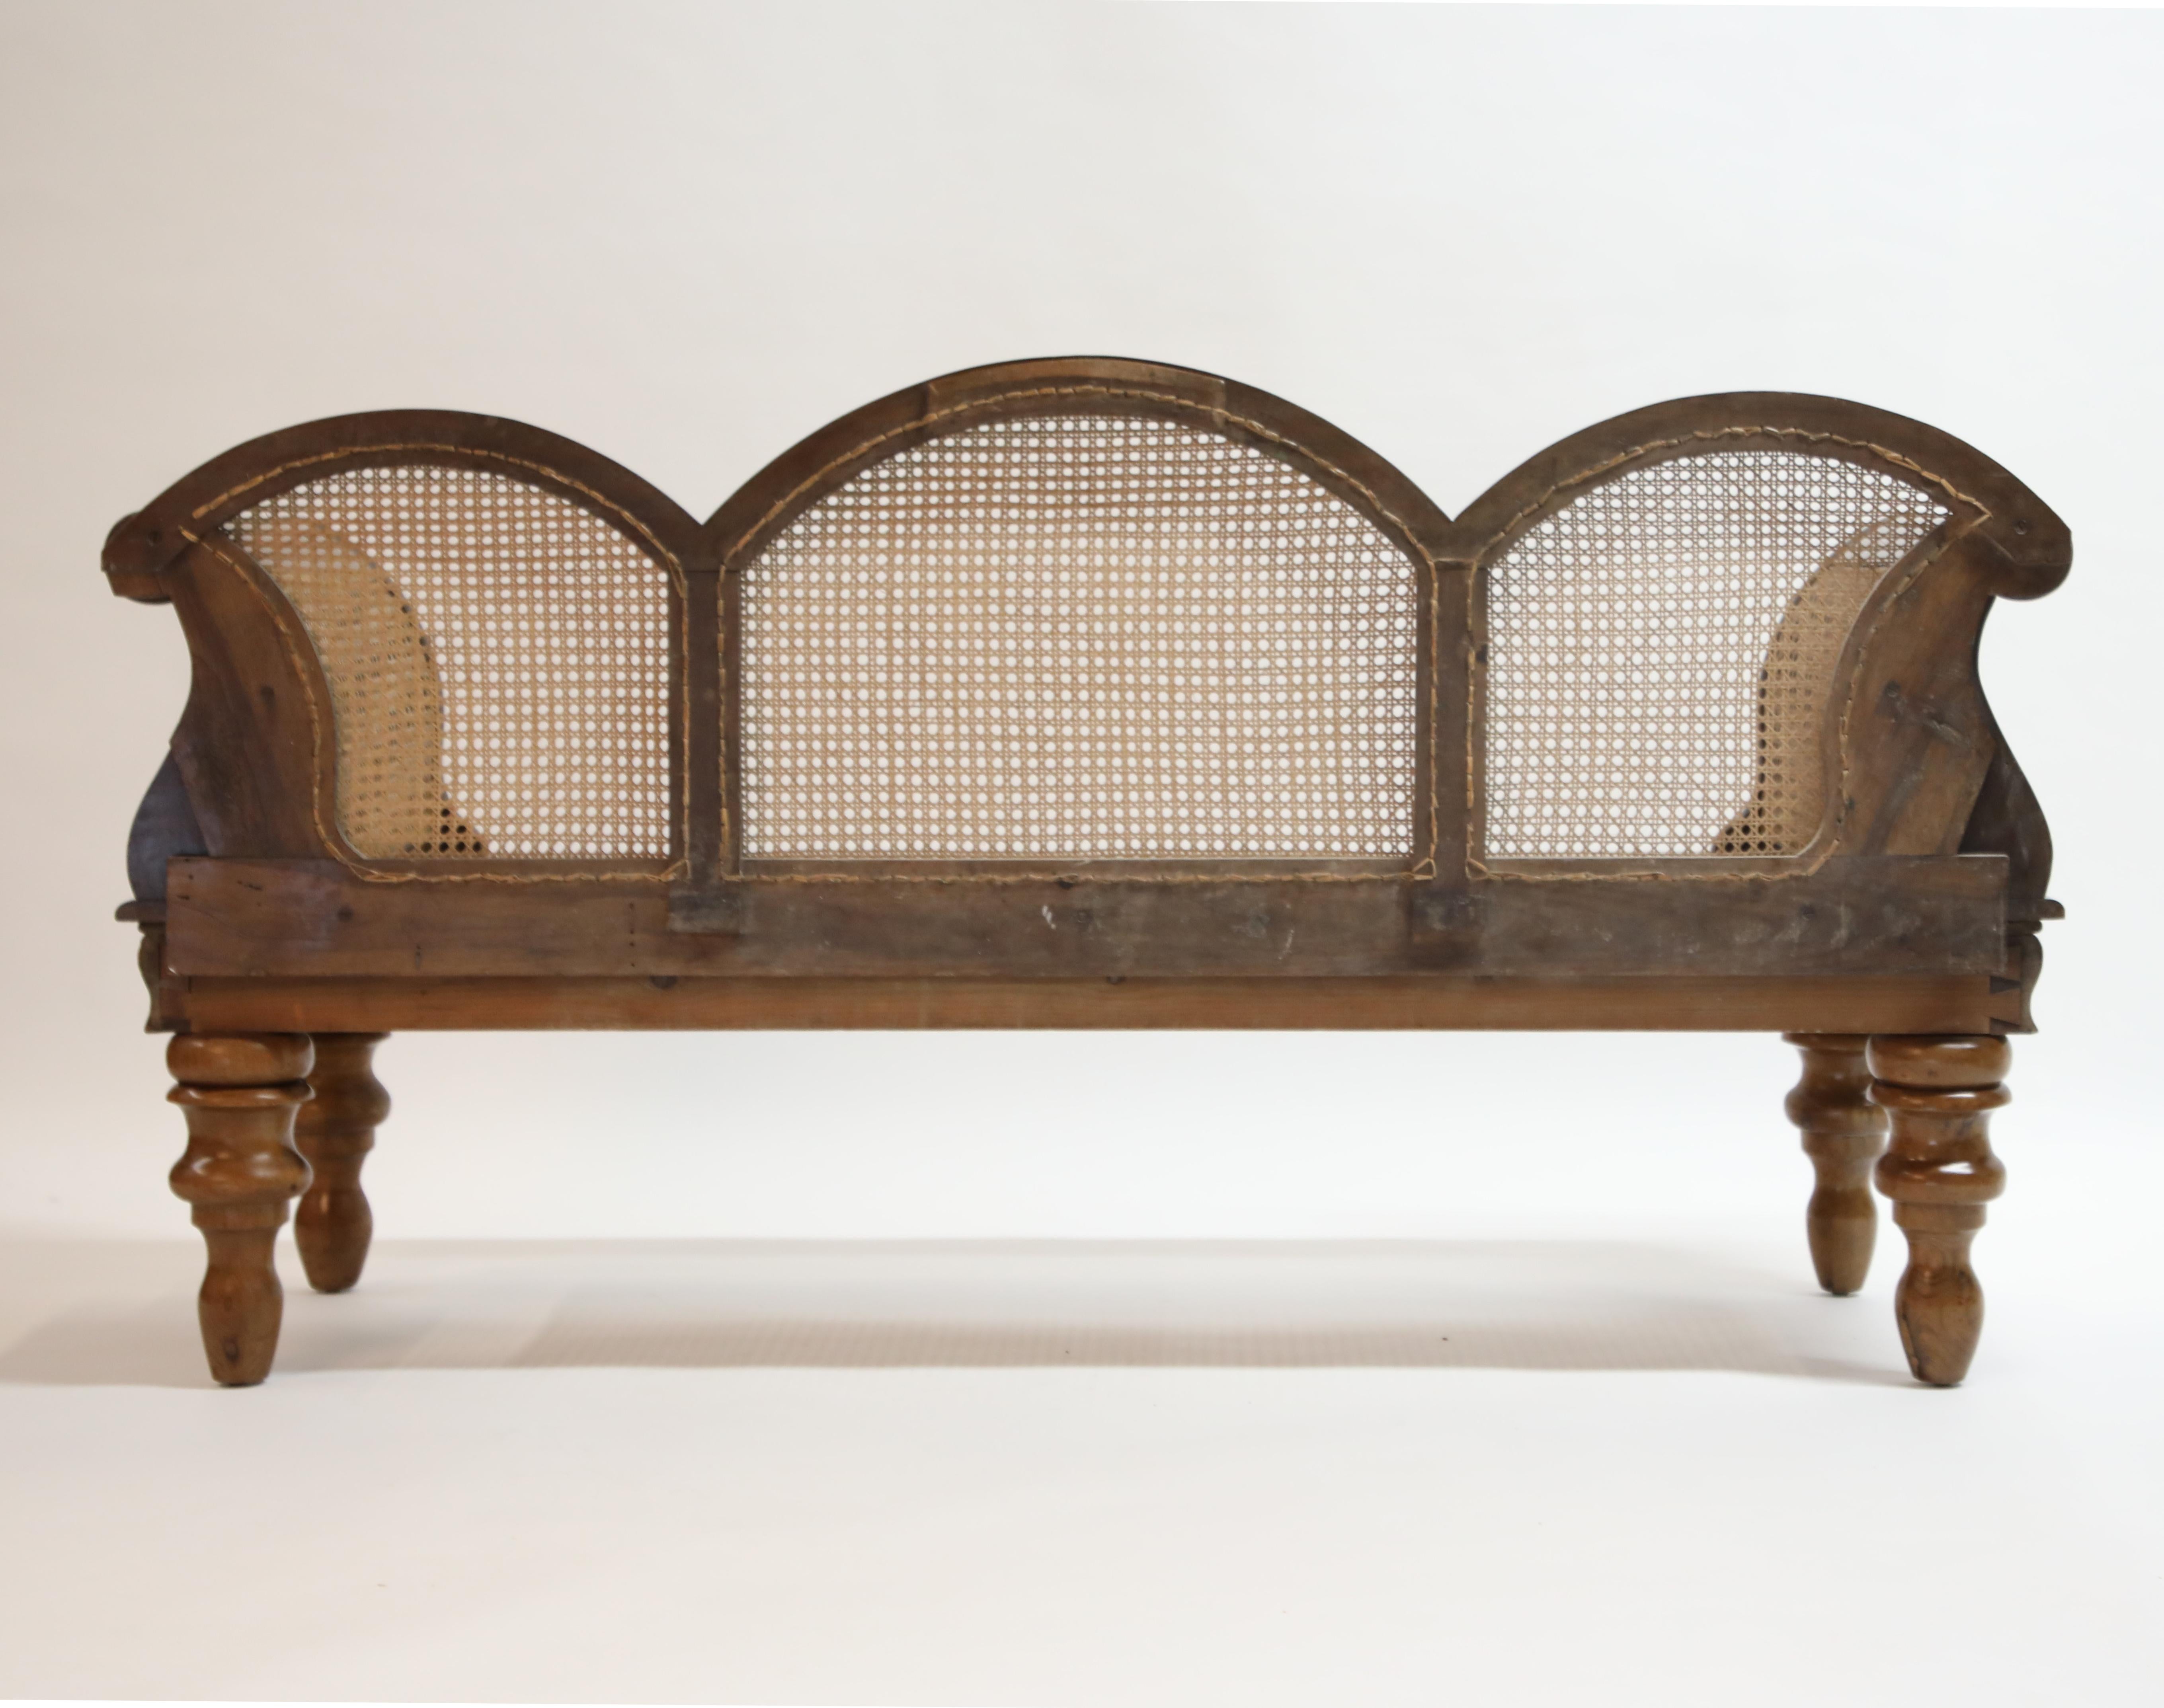 Mid-20th Century Brazilian Jacaranda Rosewood Sofa with Caning and Scrolled Arms, circa 1930s